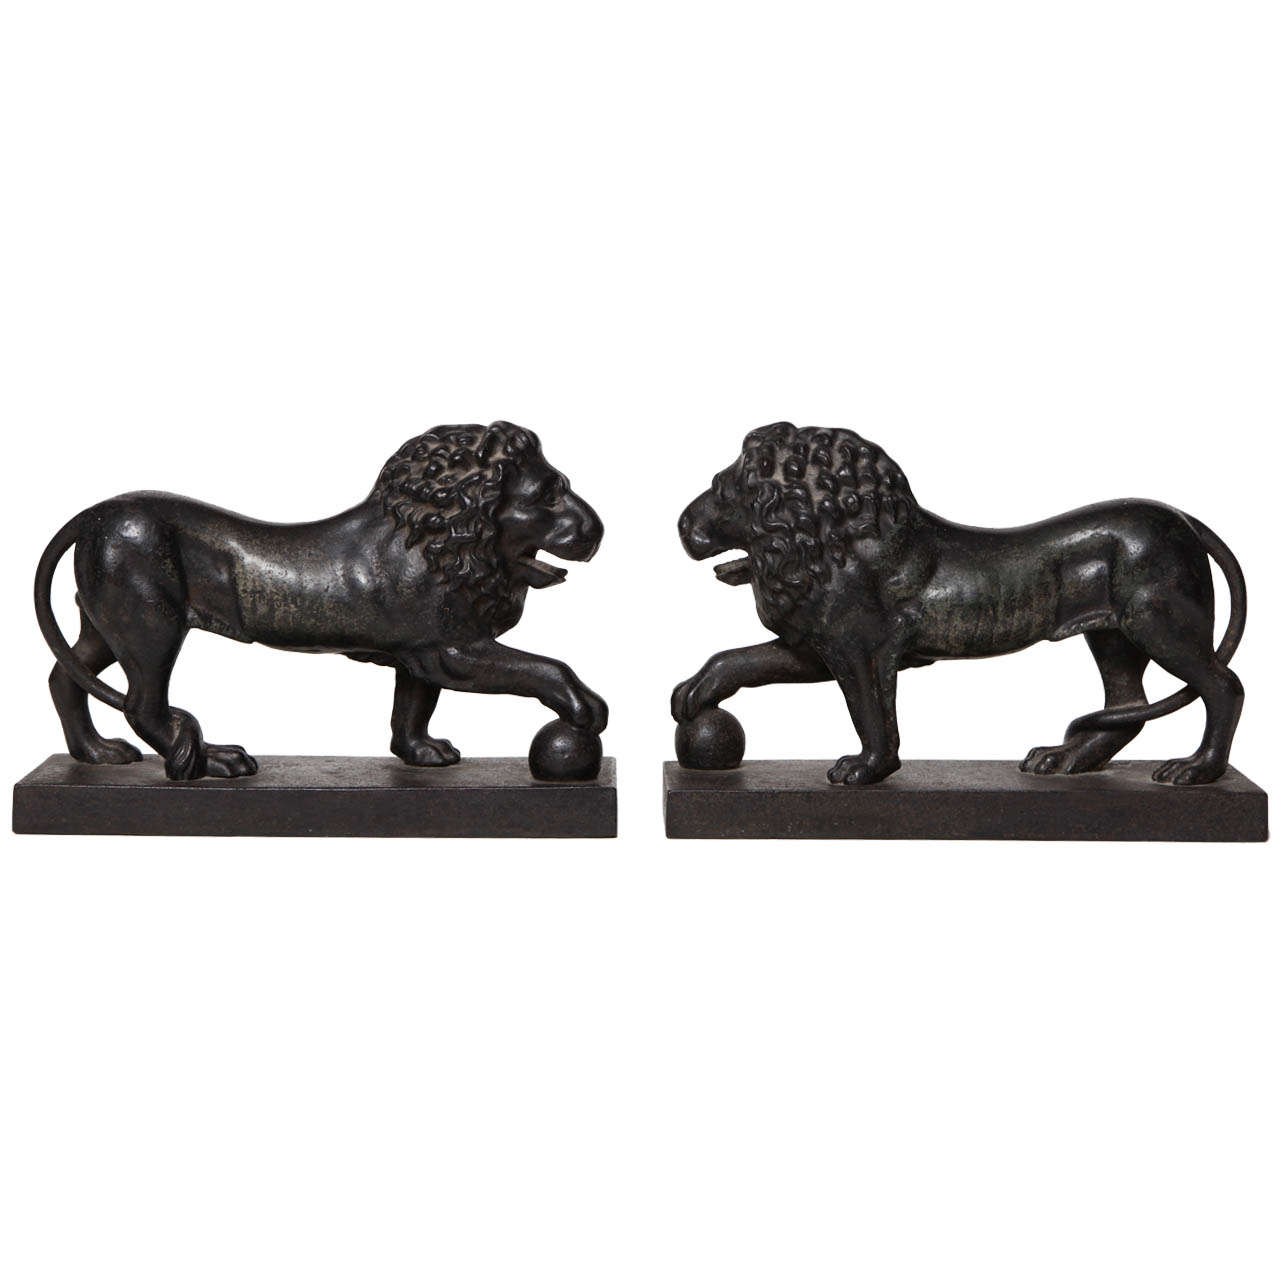 A Pair of 19th Century English Cast-Iron Lions